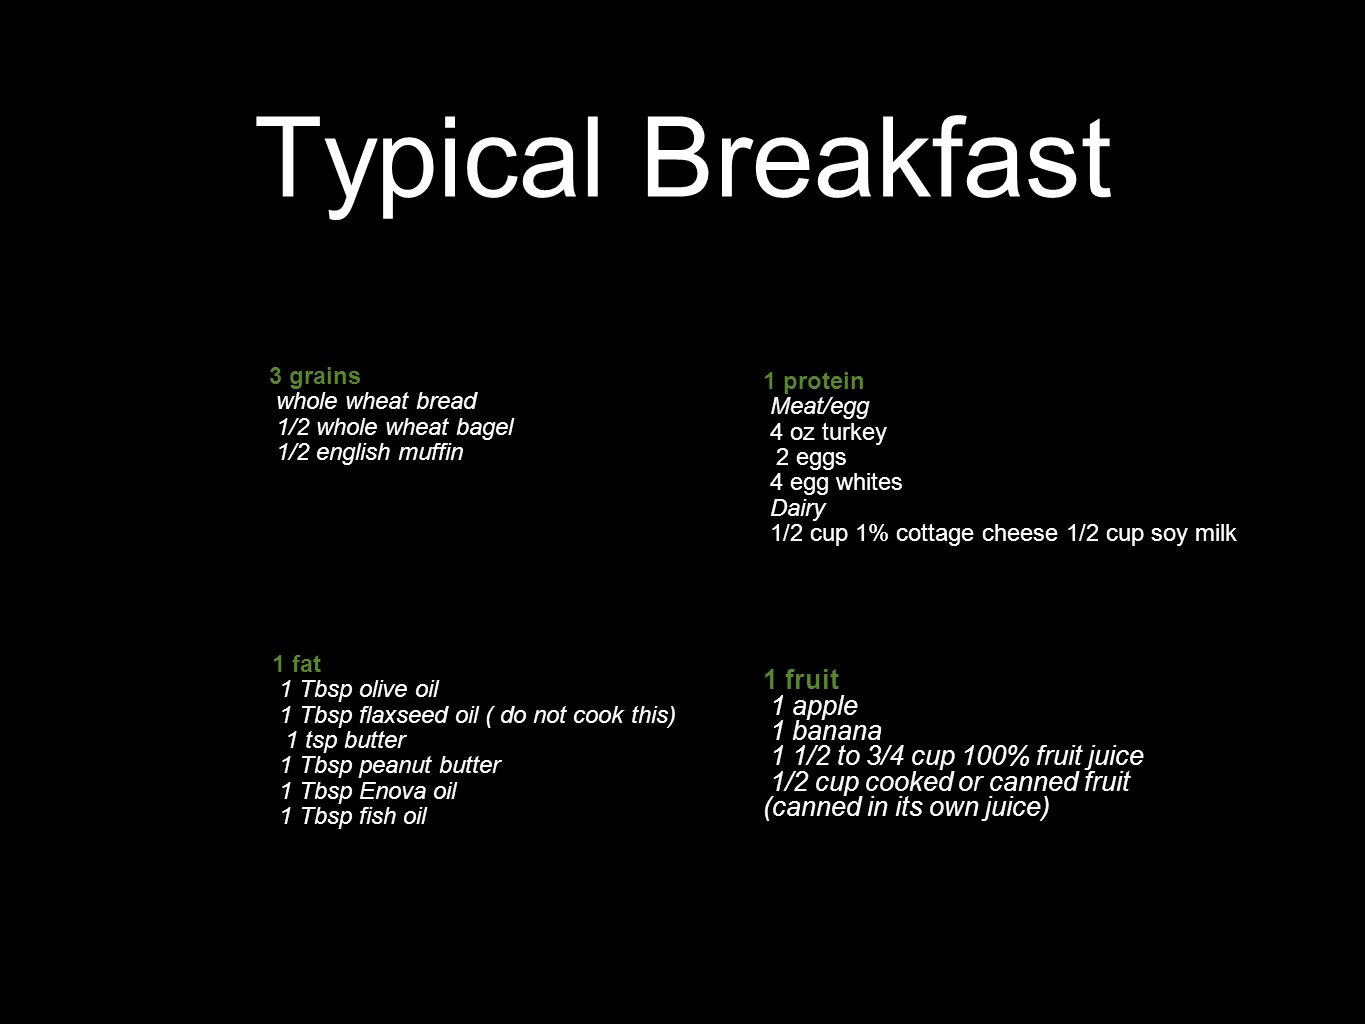 Typical Breakfast 1 protein Meat/egg 4 oz turkey 2 eggs 4 egg whites Dairy 1/2 cup 1% cottage cheese 1/2 cup soy milk 1 fruit 1 apple 1 banana 1 1/2 to 3/4 cup 100% fruit juice 1/2 cup cooked or canned fruit (canned in its own juice) 3 grains whole wheat bread 1/2 whole wheat bagel 1/2 english muffin 1 fat 1 Tbsp olive oil 1 Tbsp flaxseed oil ( do not cook this) 1 tsp butter 1 Tbsp peanut butter 1 Tbsp Enova oil 1 Tbsp fish oil